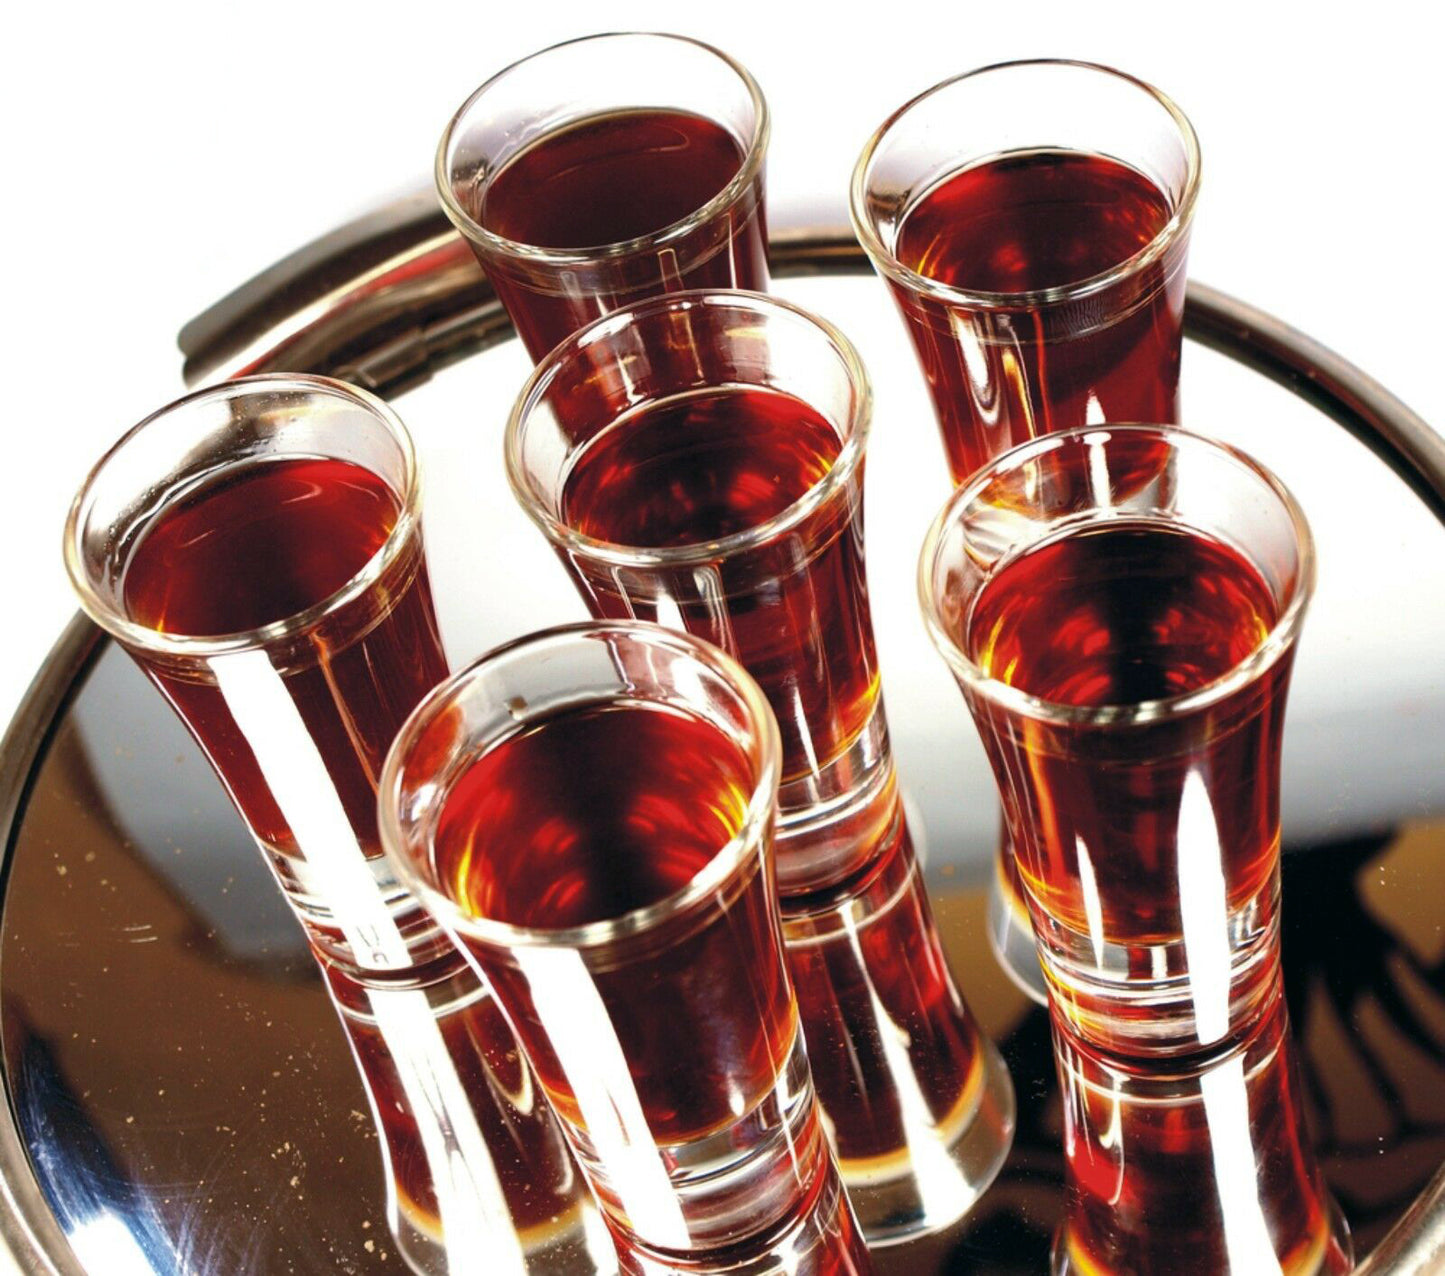 25 x Clear Shot Glasses Heavy Duty Strong Reusable Plastic 25ml CE Marked, Stackable. Bars, Pubs, BBQs, Jelly Shots, Liquor, Spirits-5056020179818-PCUP-SHOTx25-Product Pro-25ml, Clear Shot Glasses, Plastic Shot Glasses, Reusable Shot Glasses, Shot Glasses, Shots